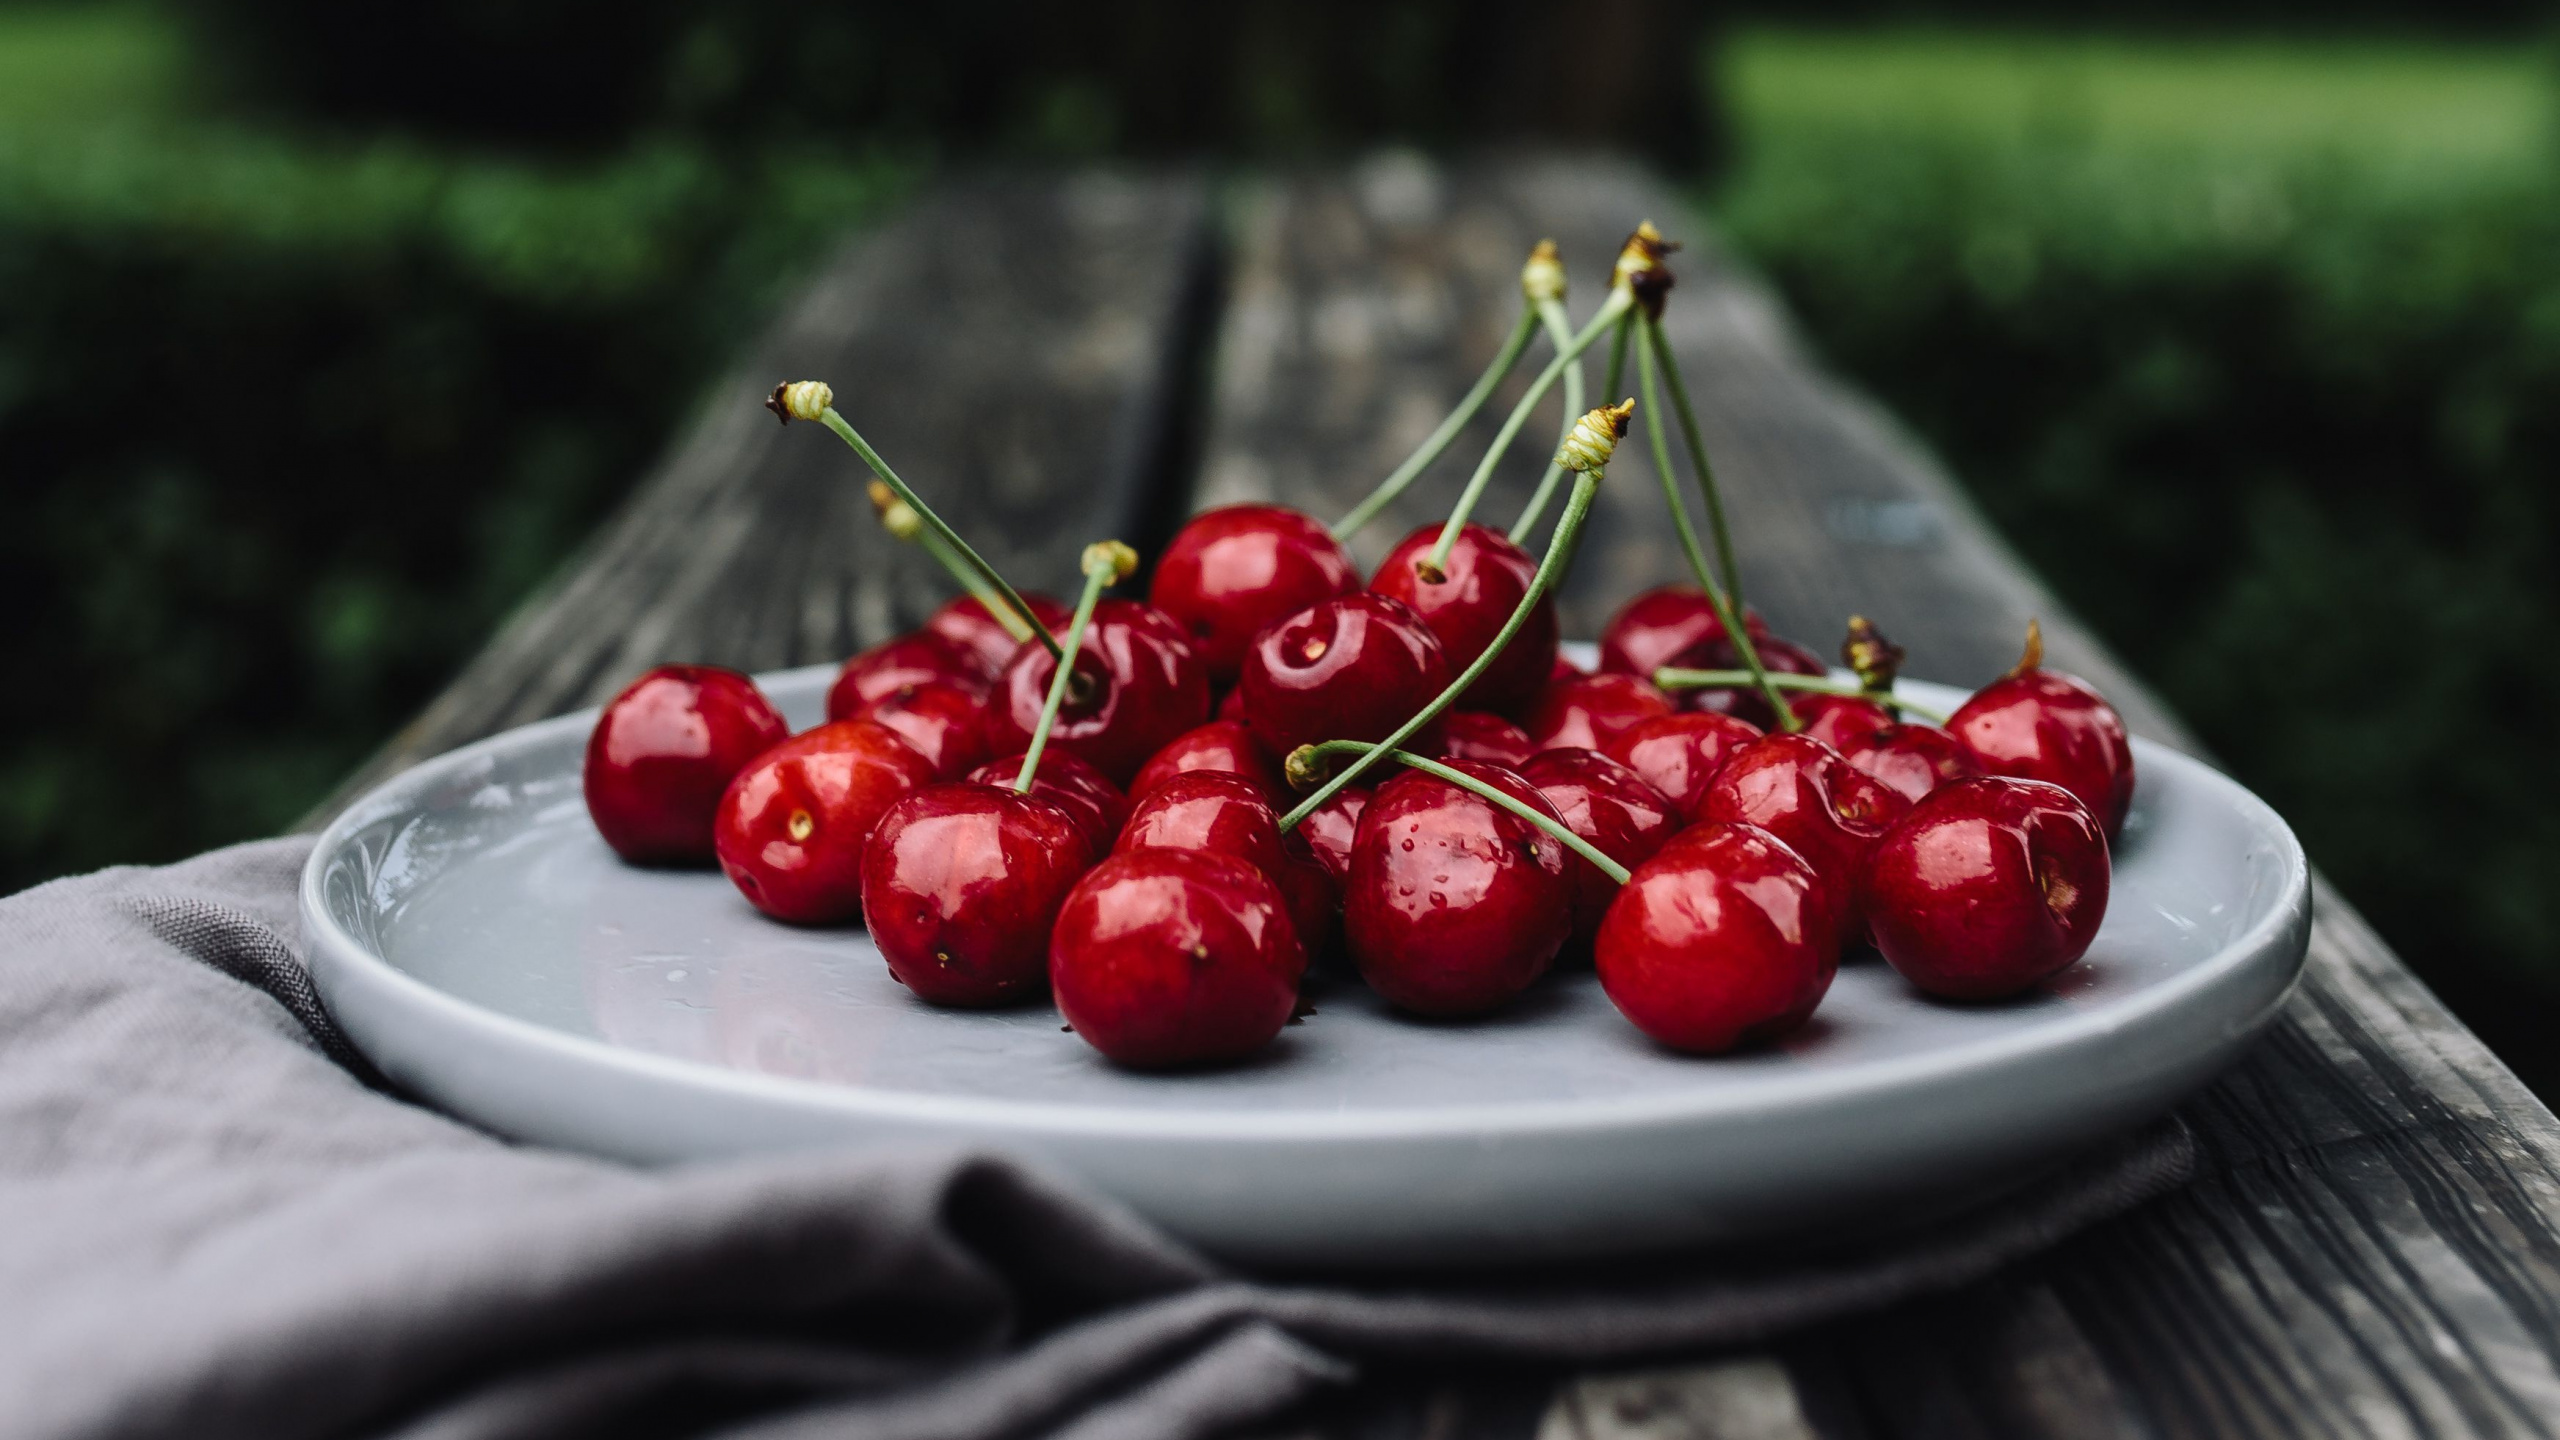 Red Cherries on White Ceramic Plate. Wallpaper in 2560x1440 Resolution